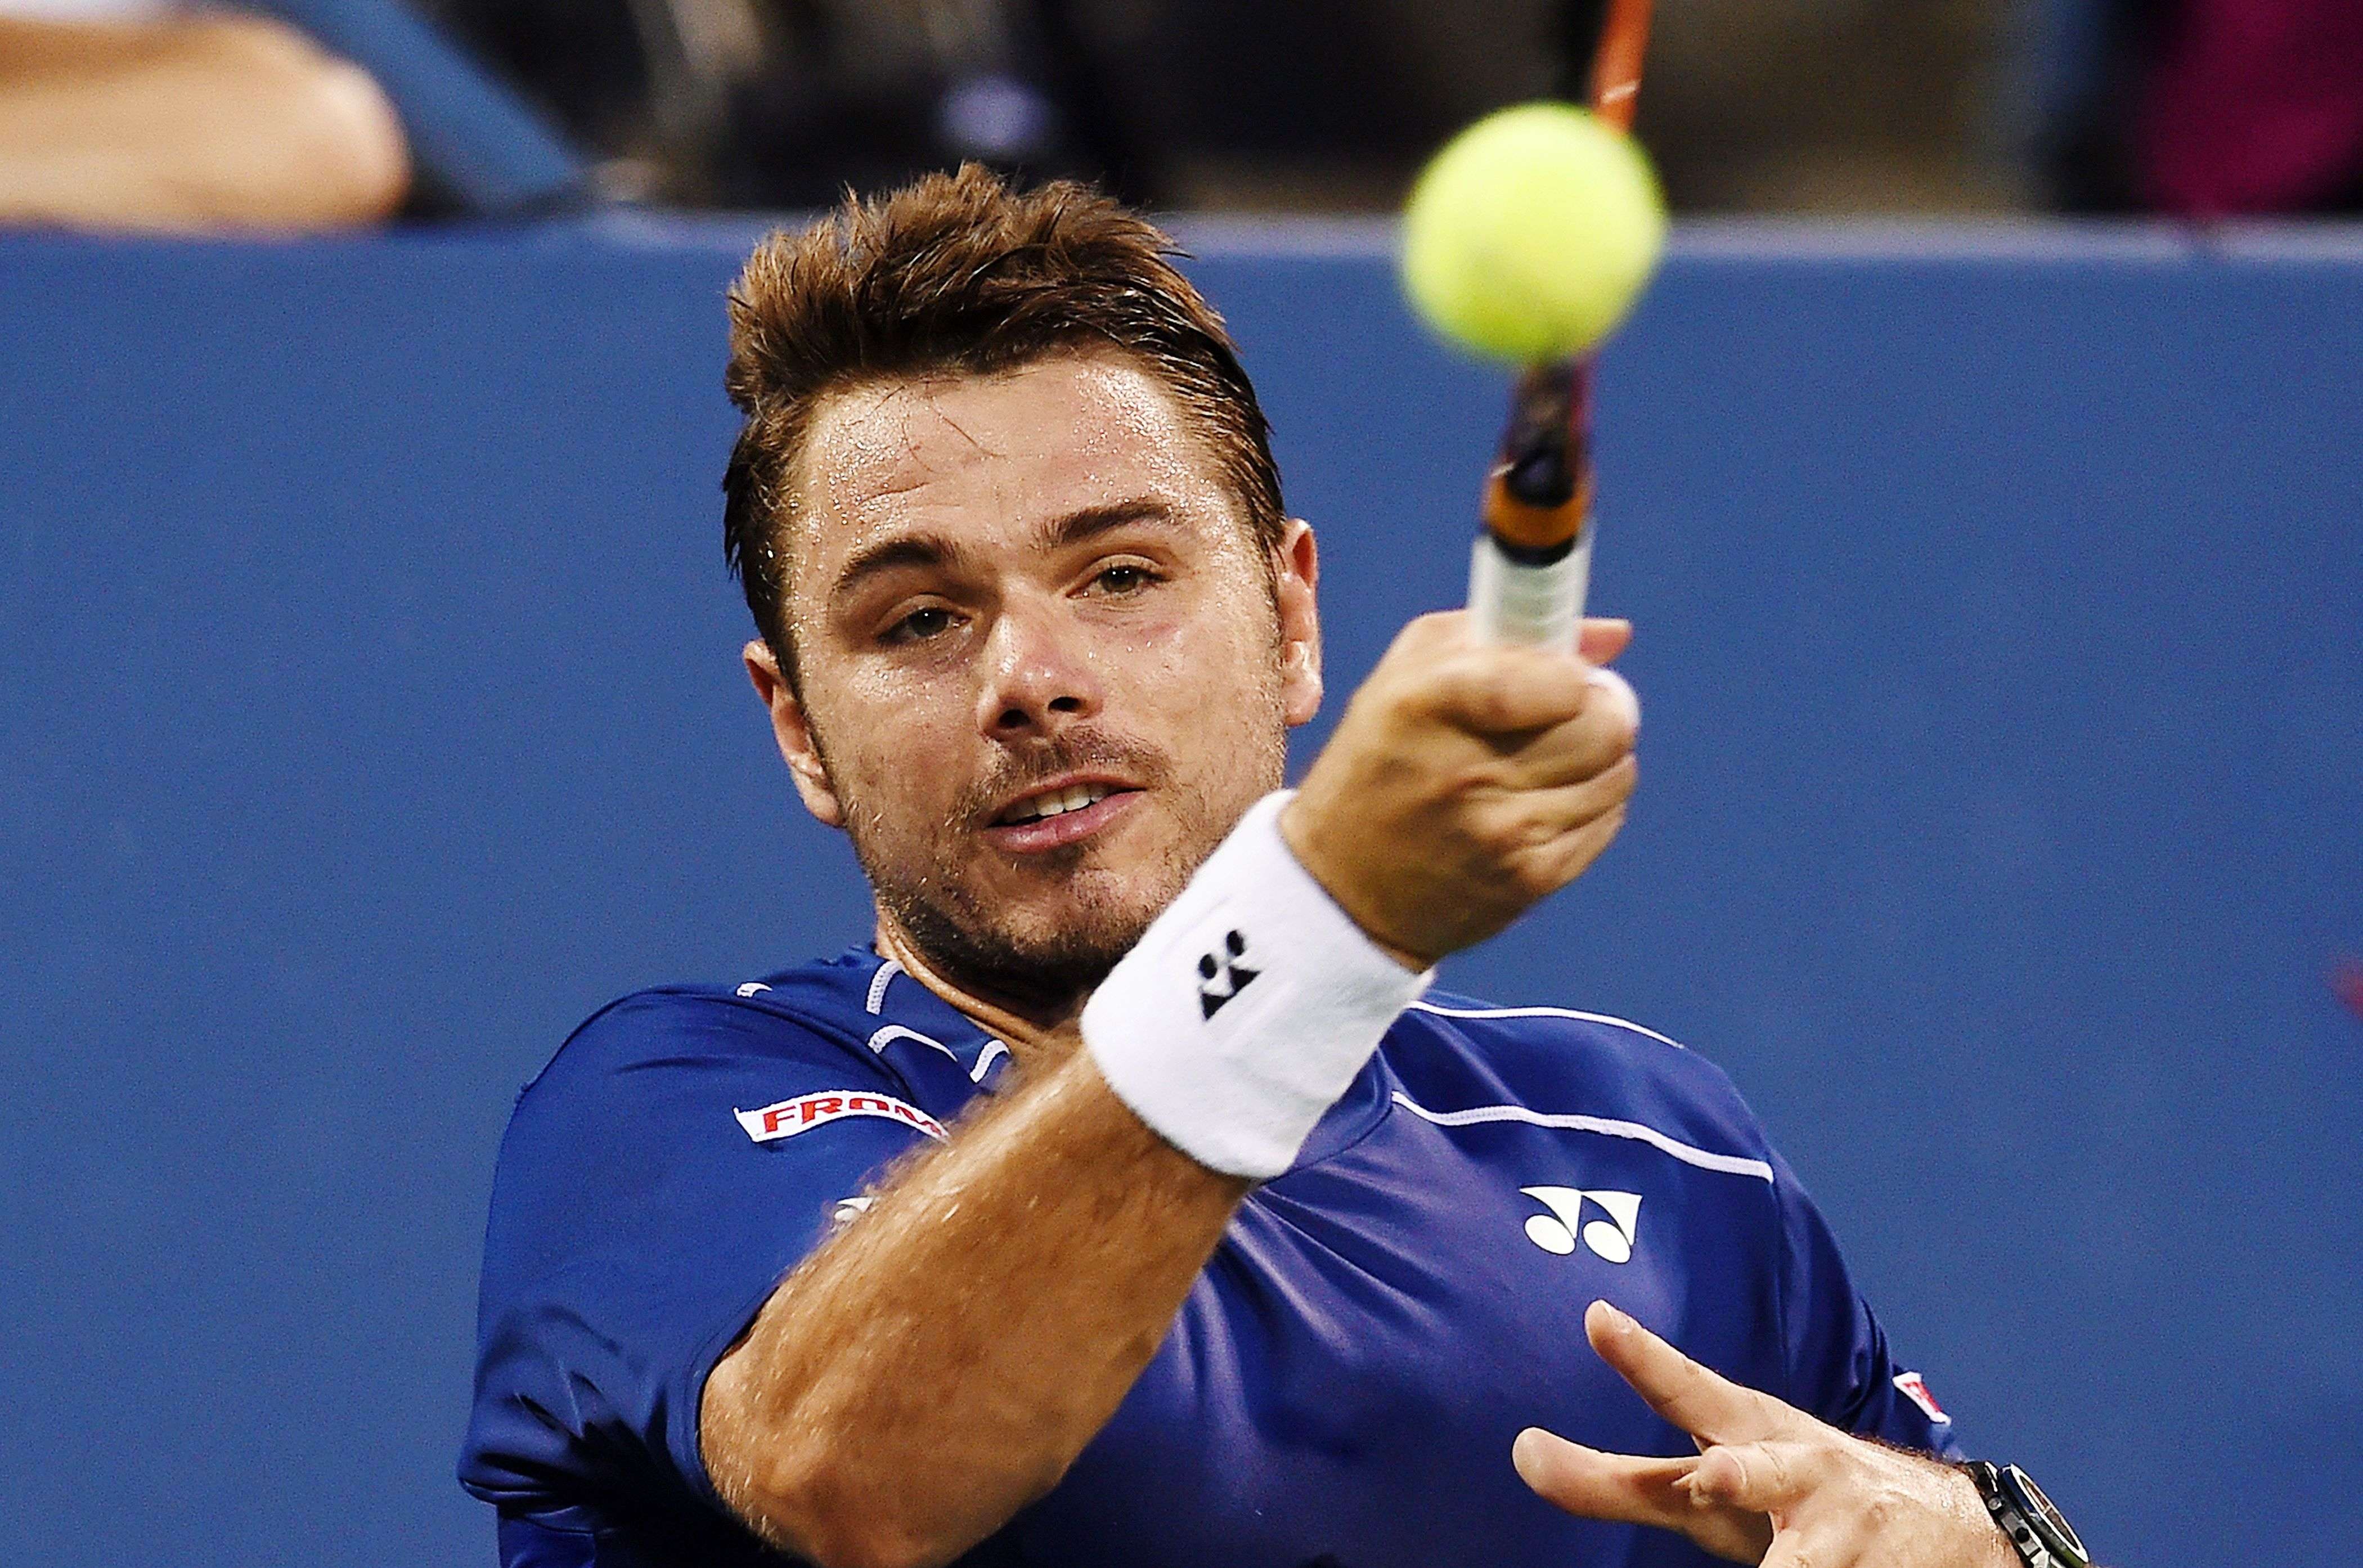 Stan Wawrinka of Switzerland returns the ball to Kevin Anderson of South Africa during their 2015 US Open Men's singles quarterfinals match at the USTA Billie Jean King National Tennis Center in New York on September 9, 2015. Wawrinka won 6-4, 6-4, 6-0. AFP PHOTO/JEWEL SAMAD